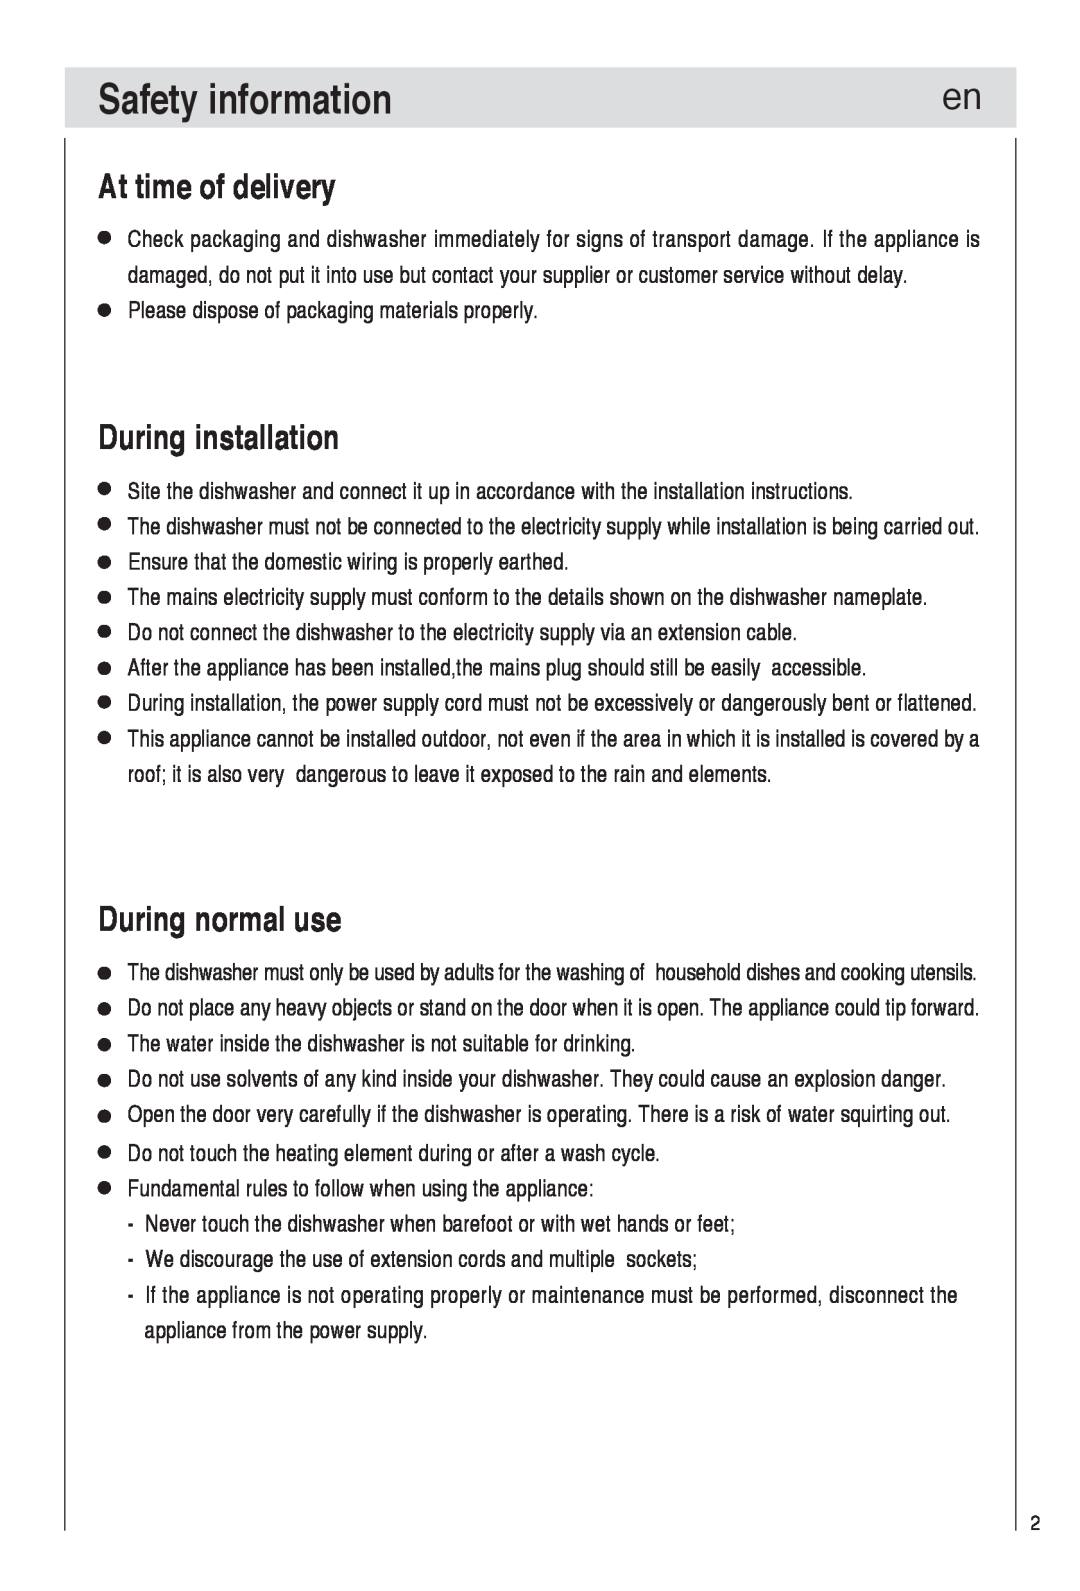 Haier DW9-TFE1 operation manual Safety information, At time of delivery, During installation, During normal use 